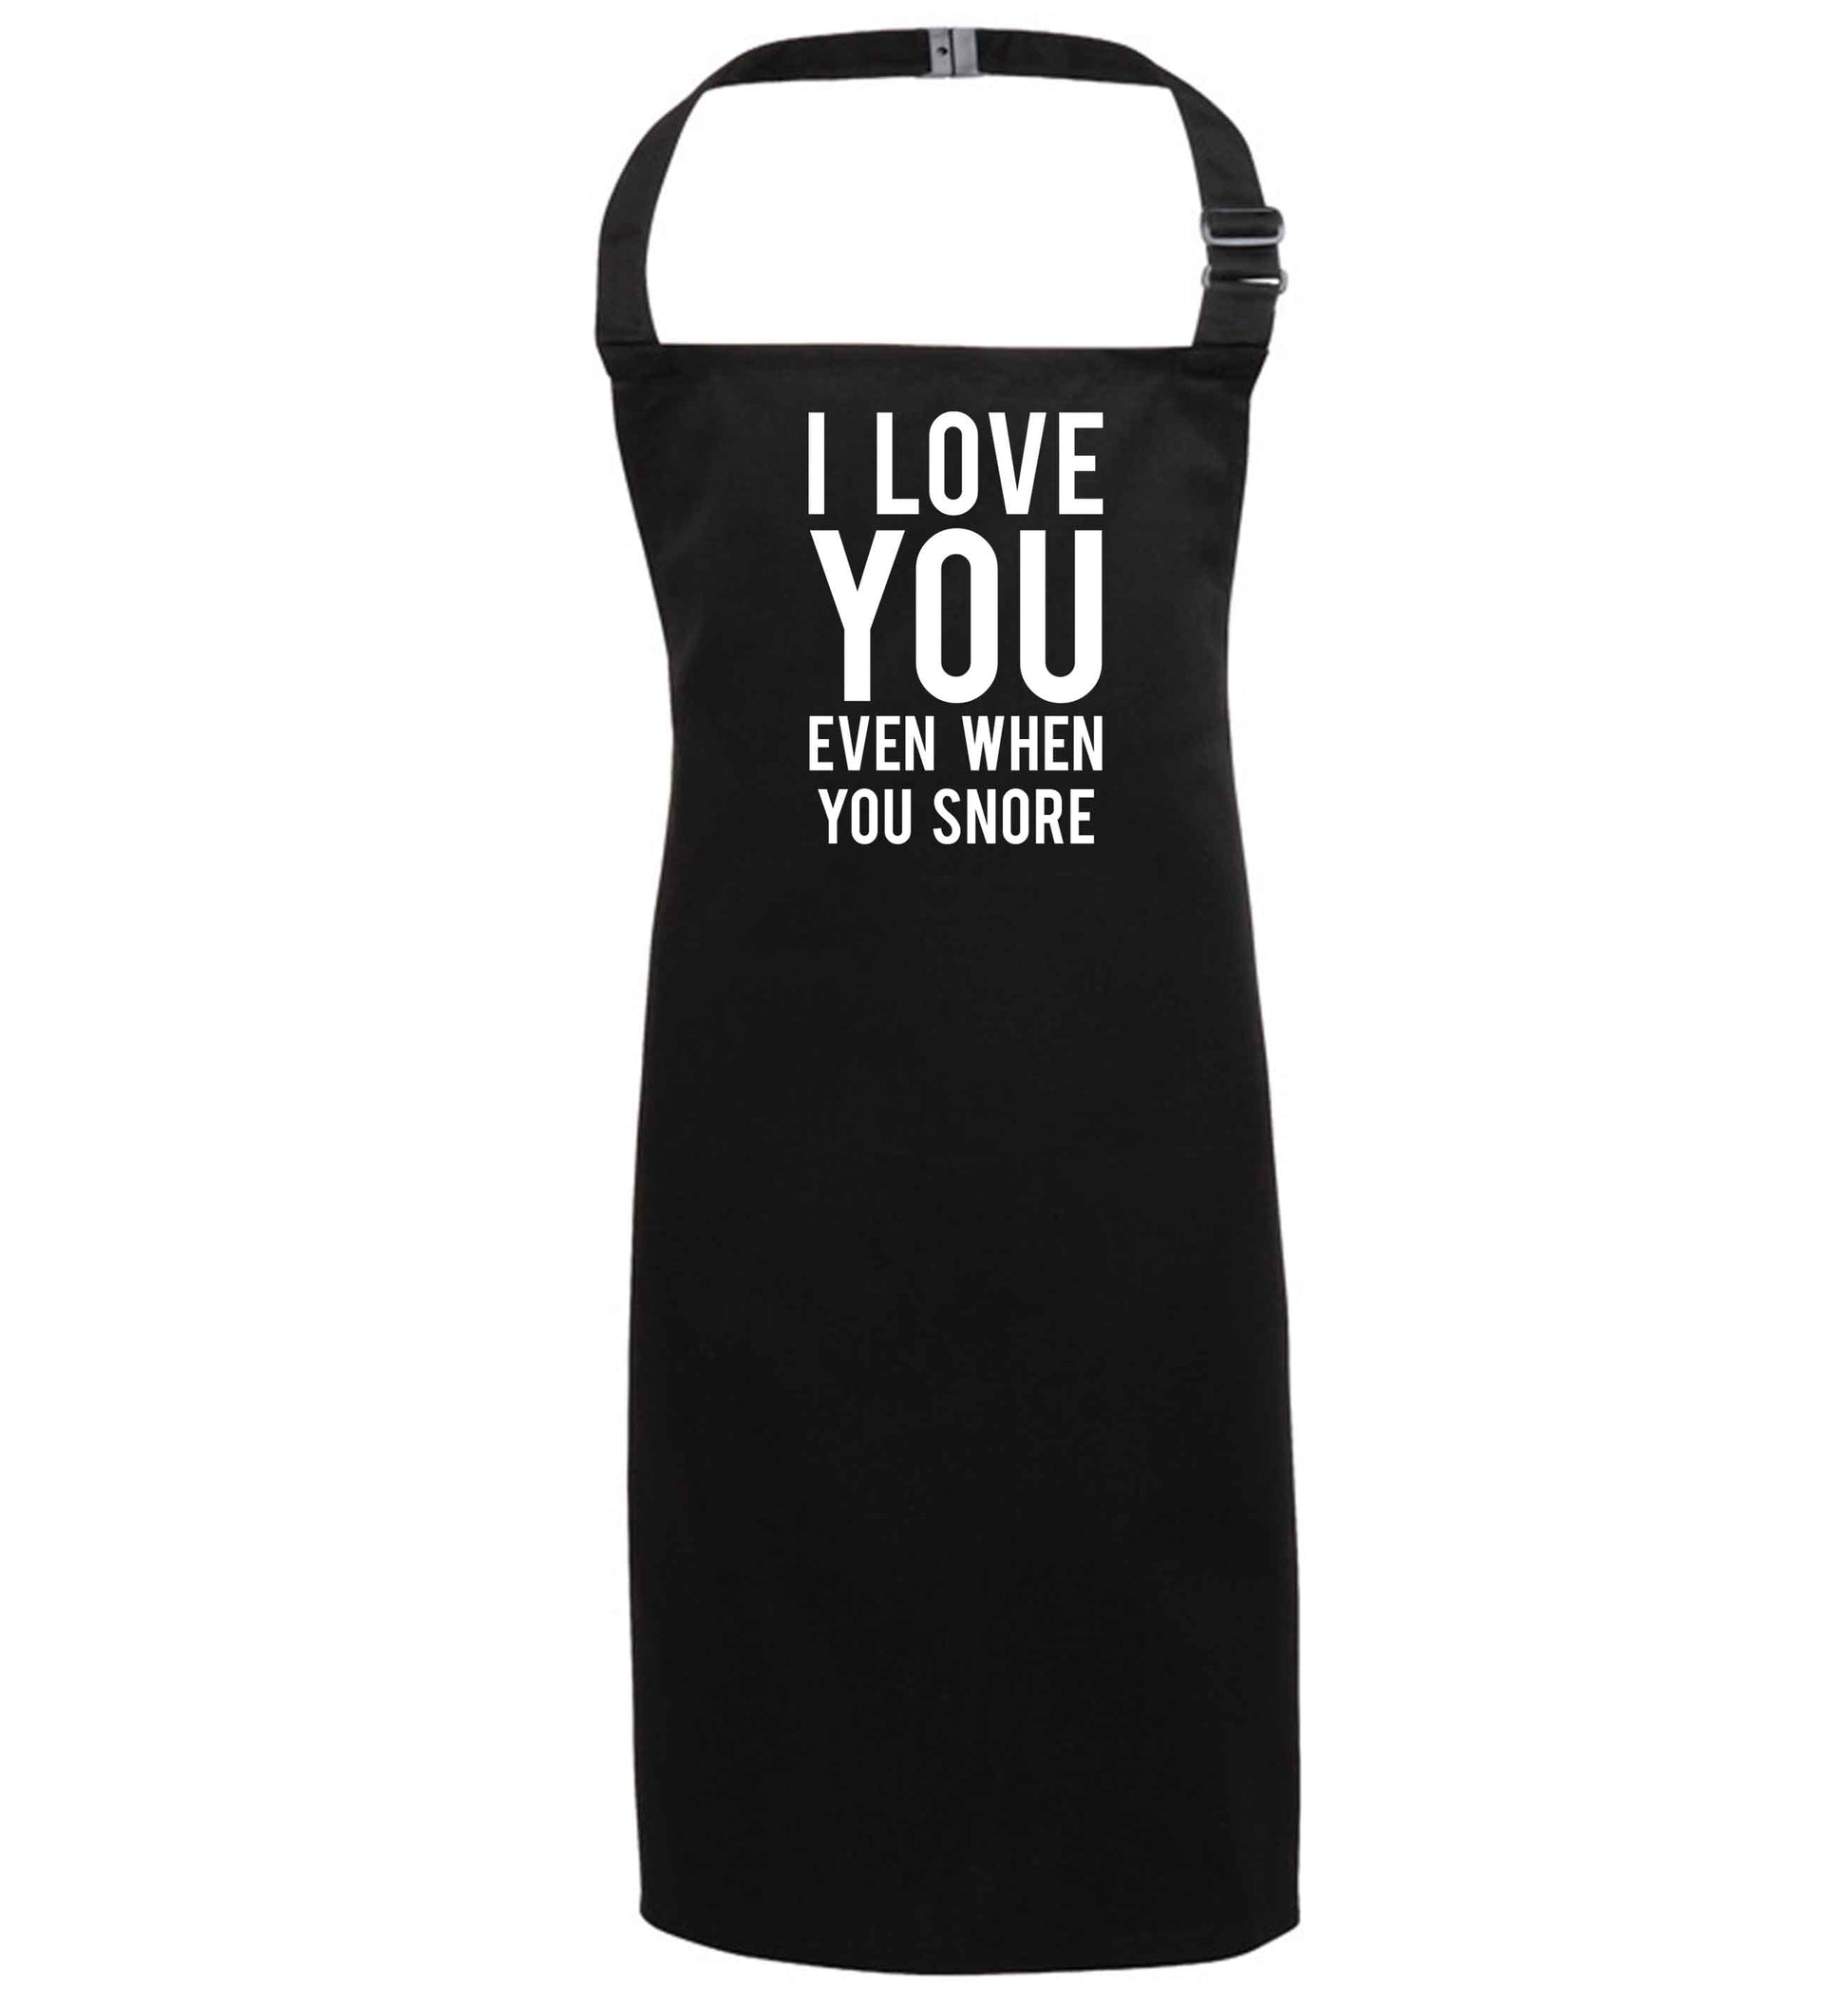 I love you even when you snore black apron 7-10 years